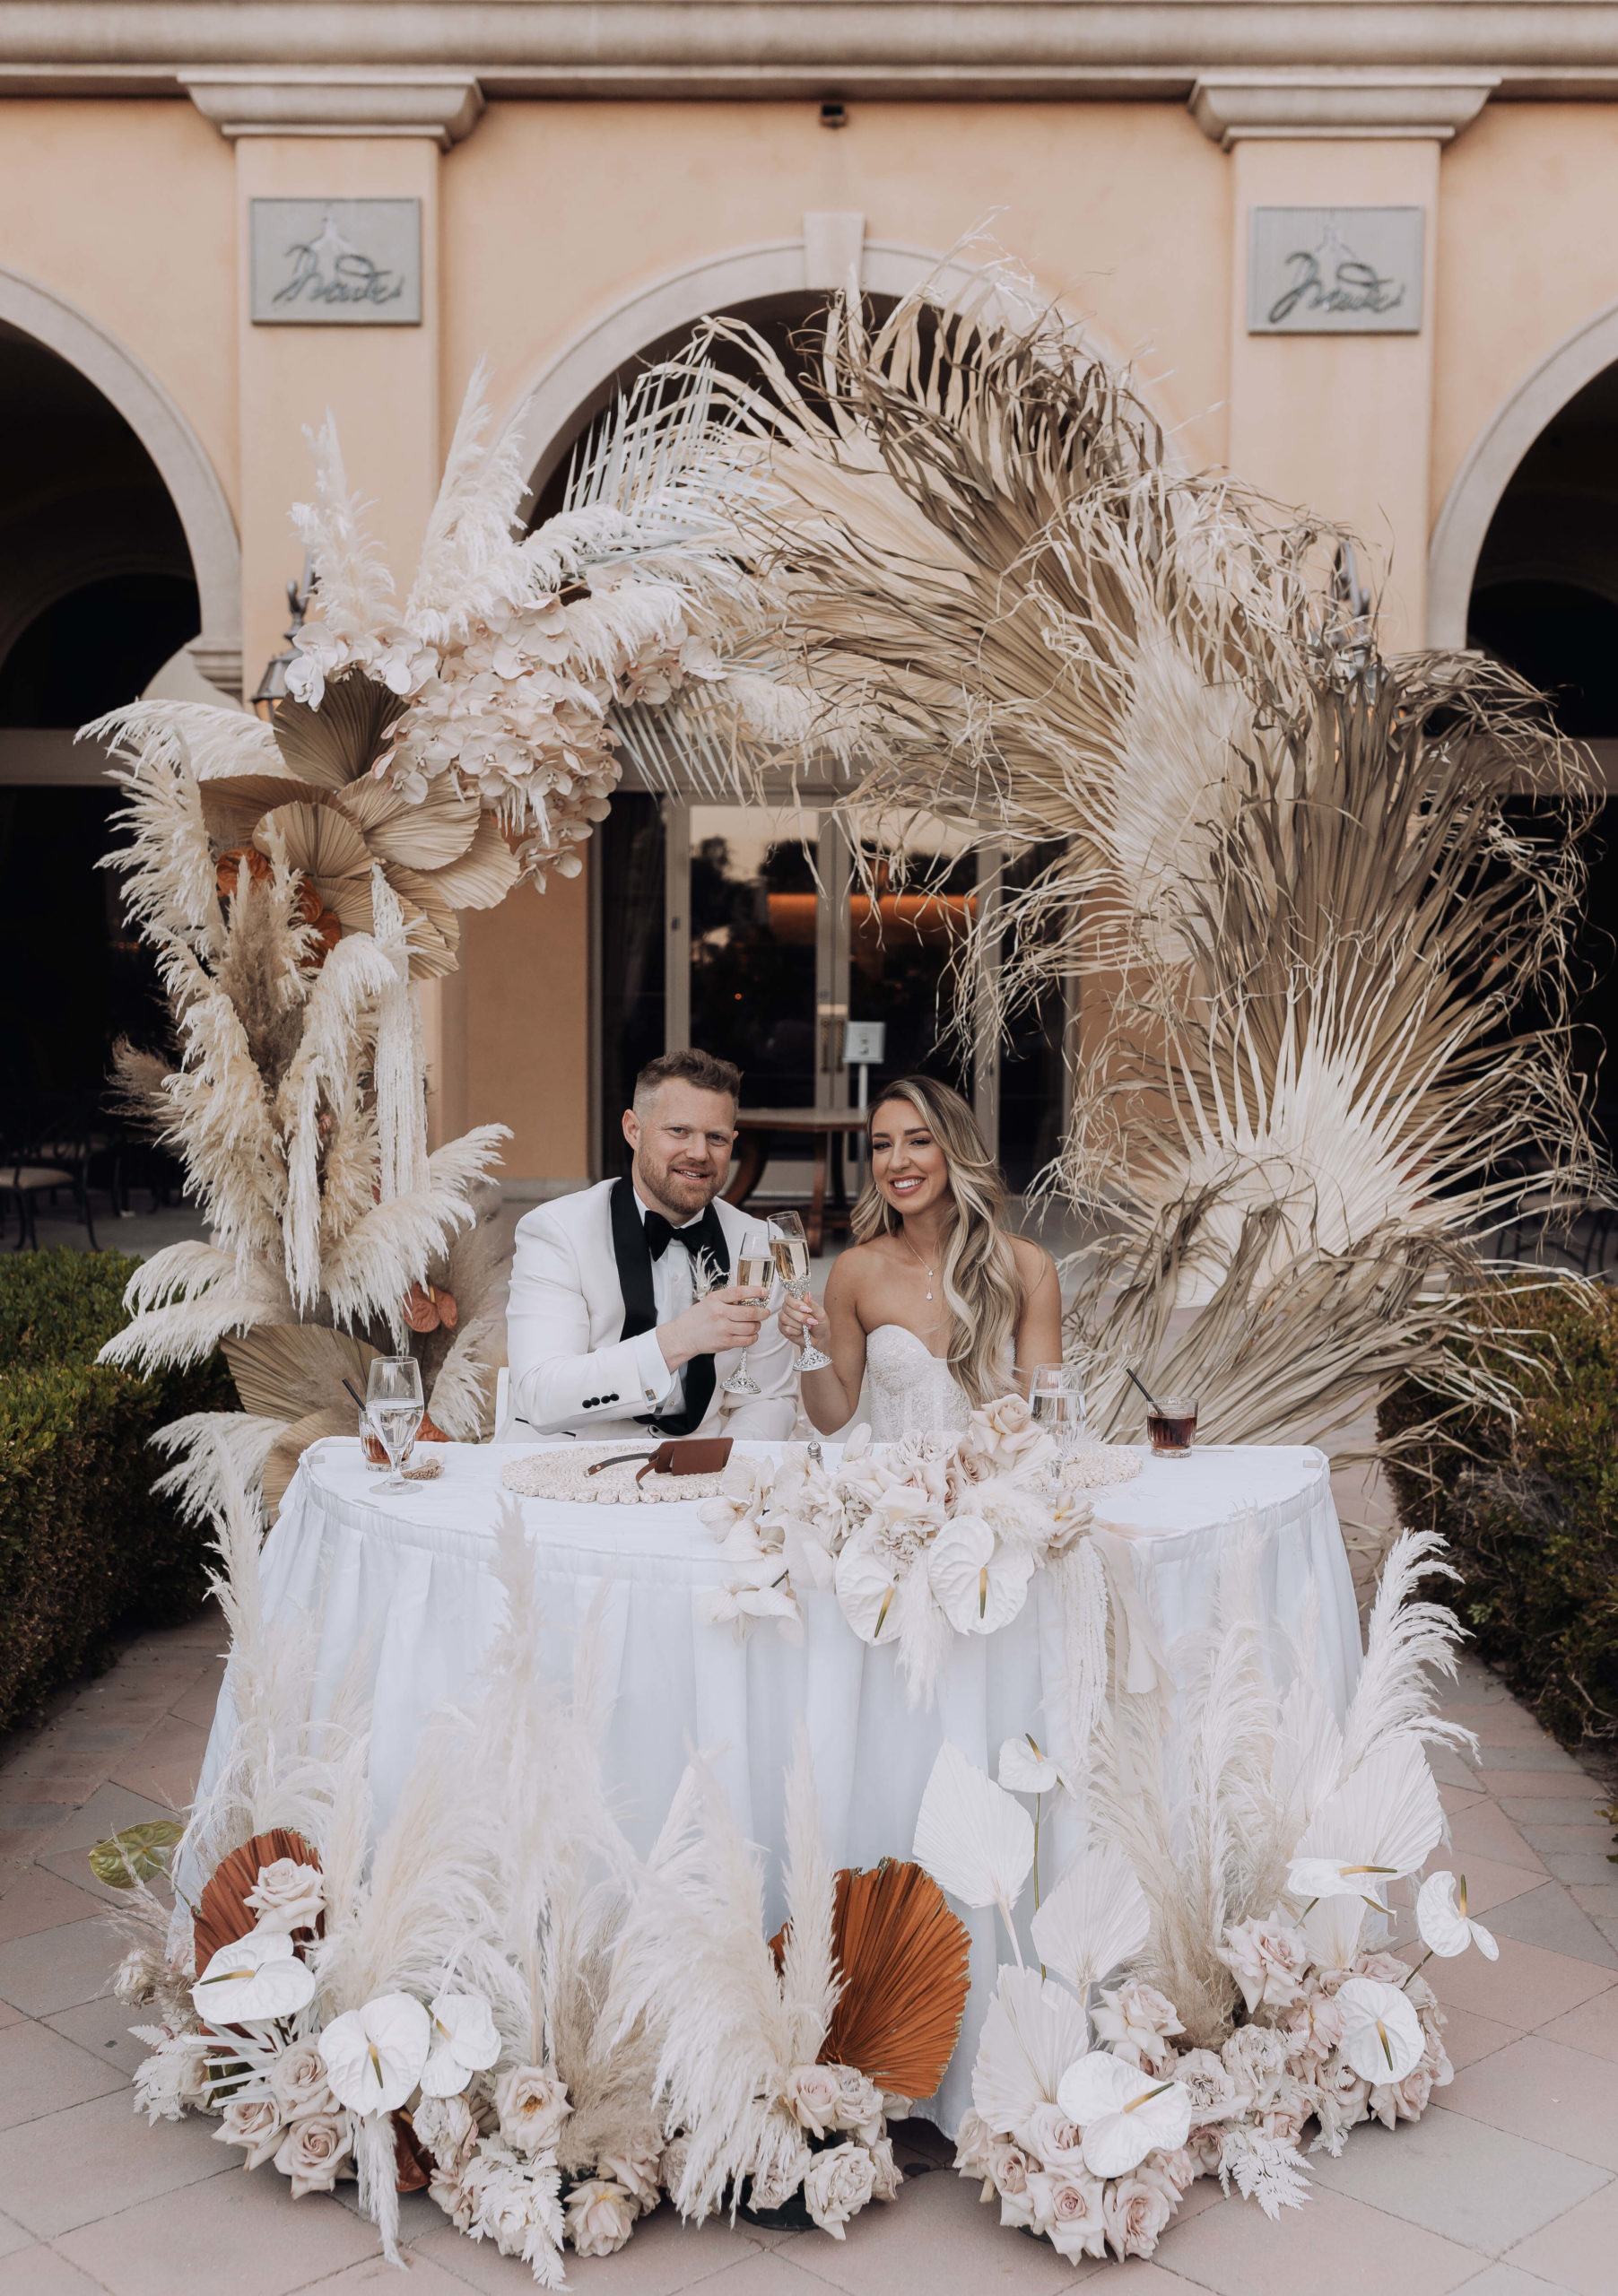 Lake Las Vegas Meets Modern Boho Bride. Beautiful newlyweds cheers with champagne at the sweetheart table